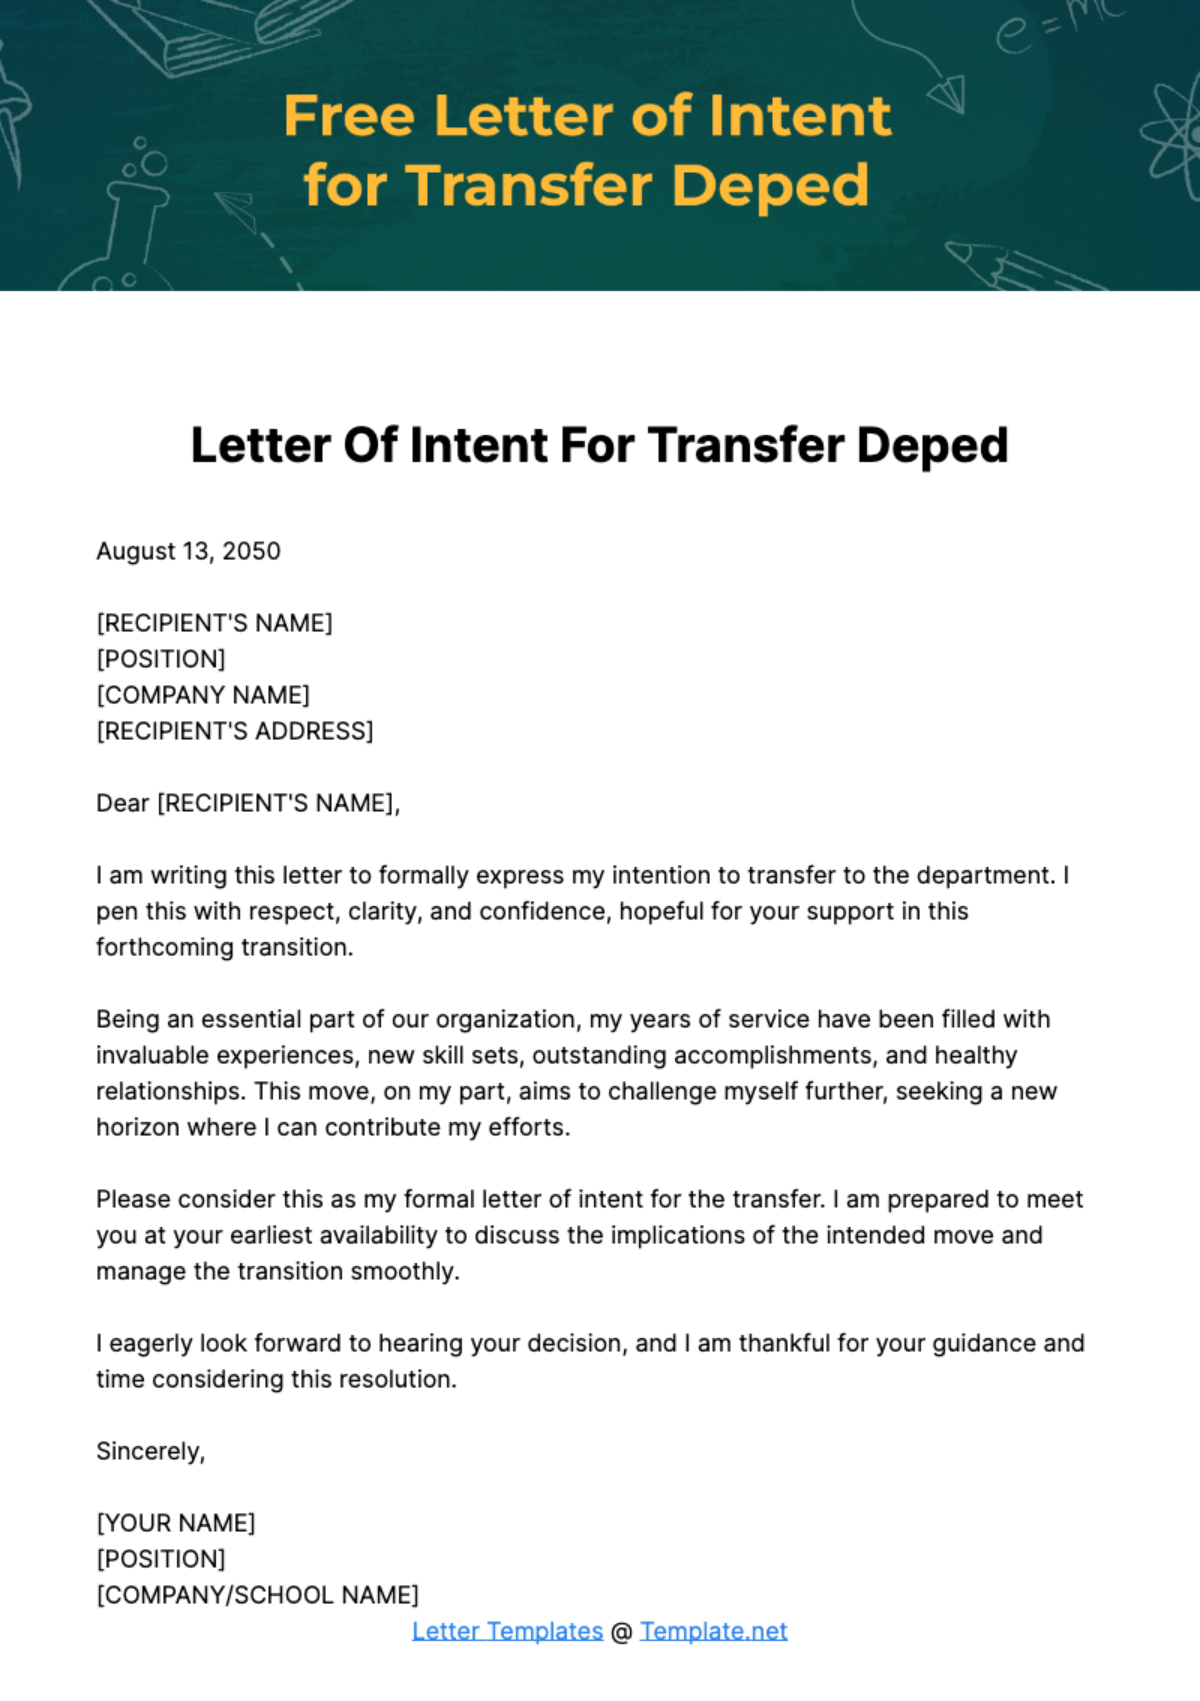 Free Letter of Intent for Transfer Deped Template